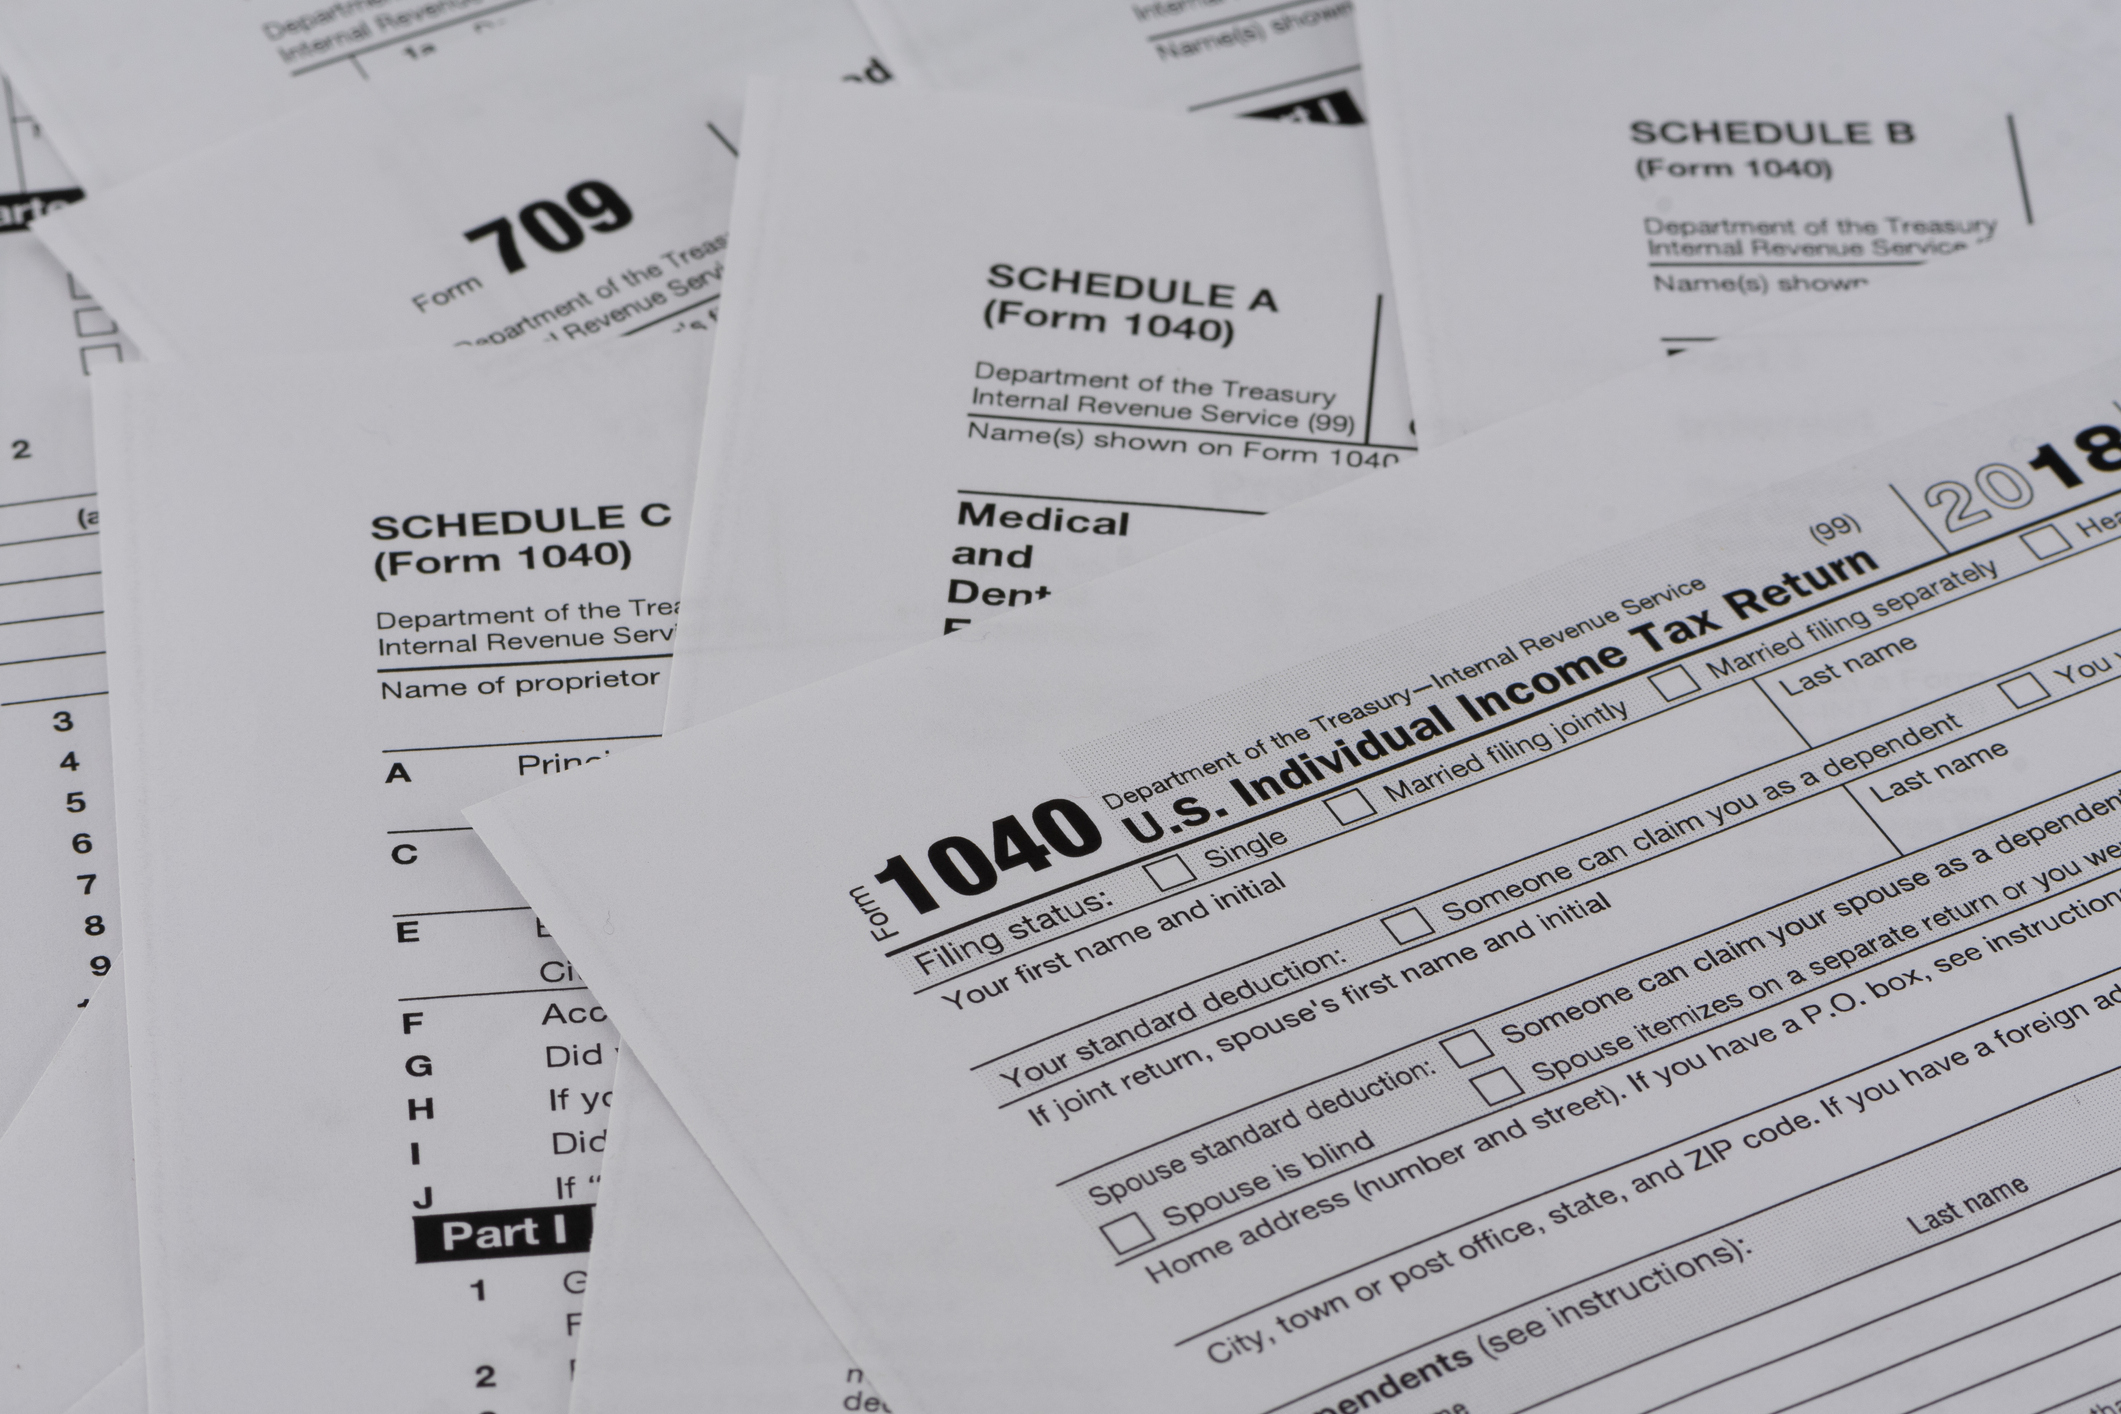 Assorted U.S. tax forms including the 1040 and Schedules A and B, indicating tax filing season